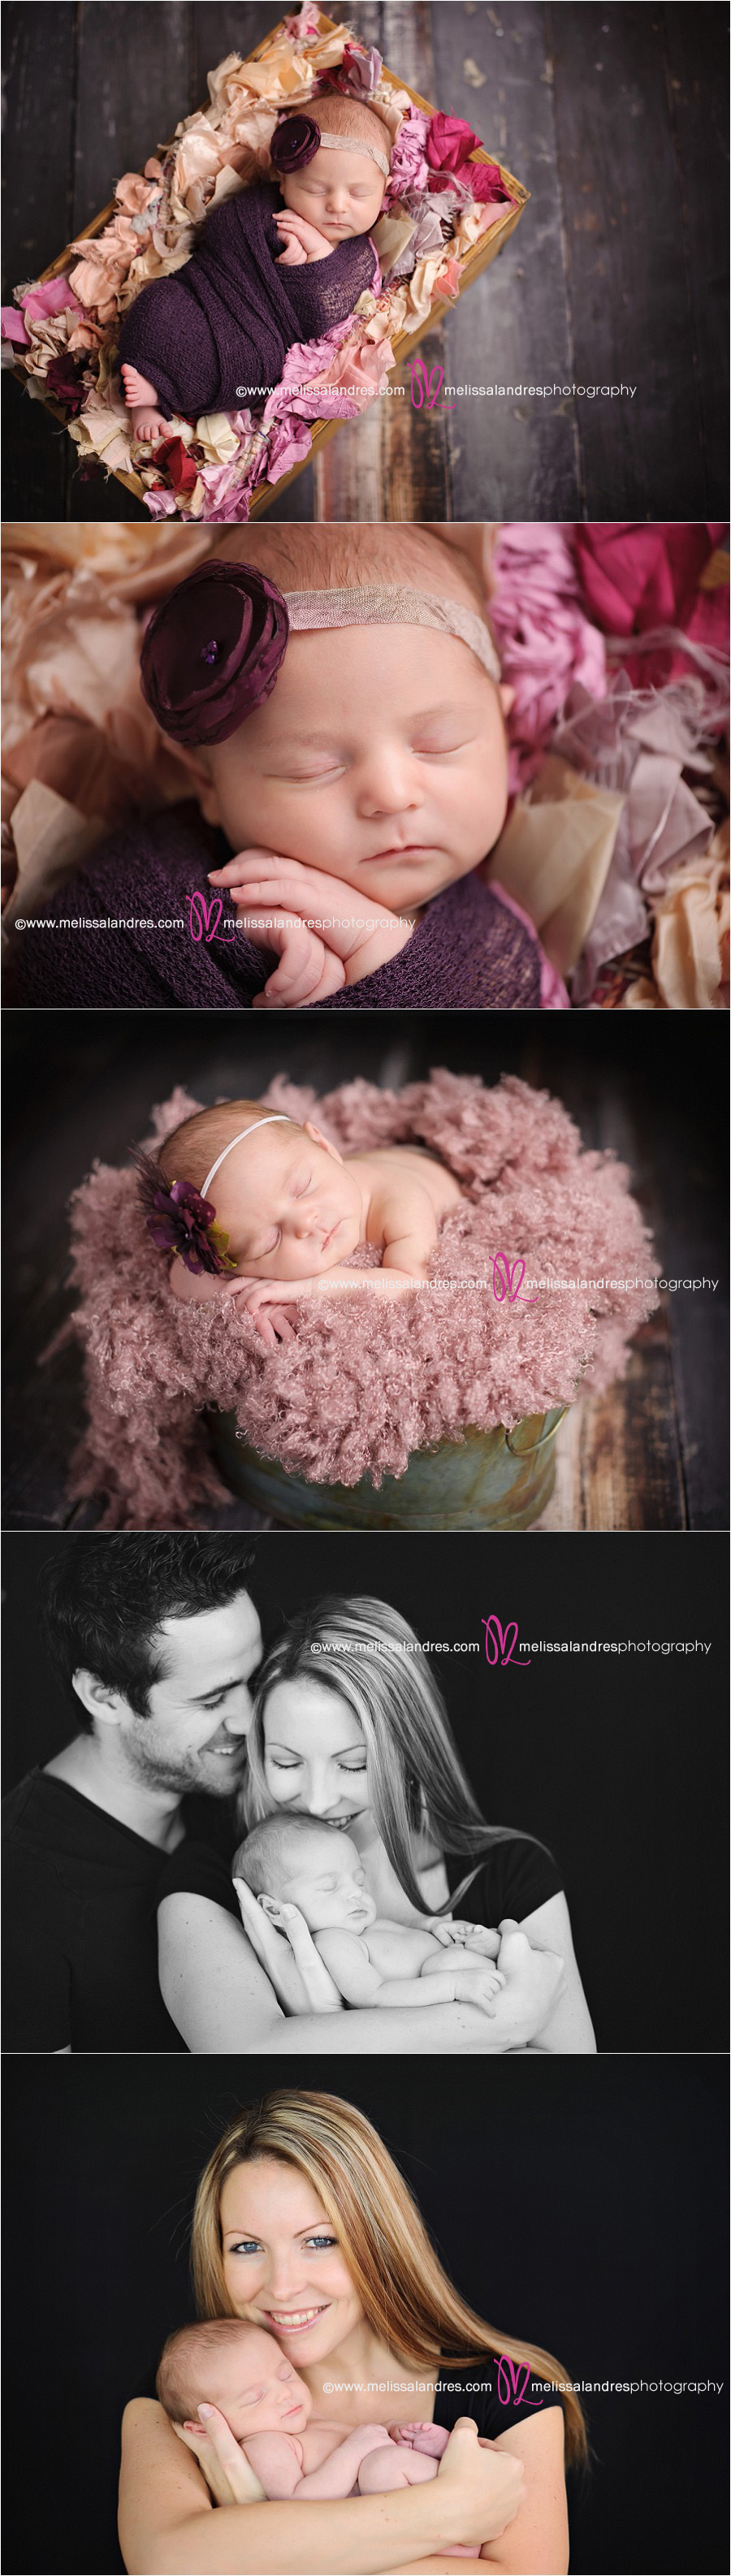 baby's first professional photos, artistic creative newborn photo shoot with props, the best baby photographer in Palm Springs